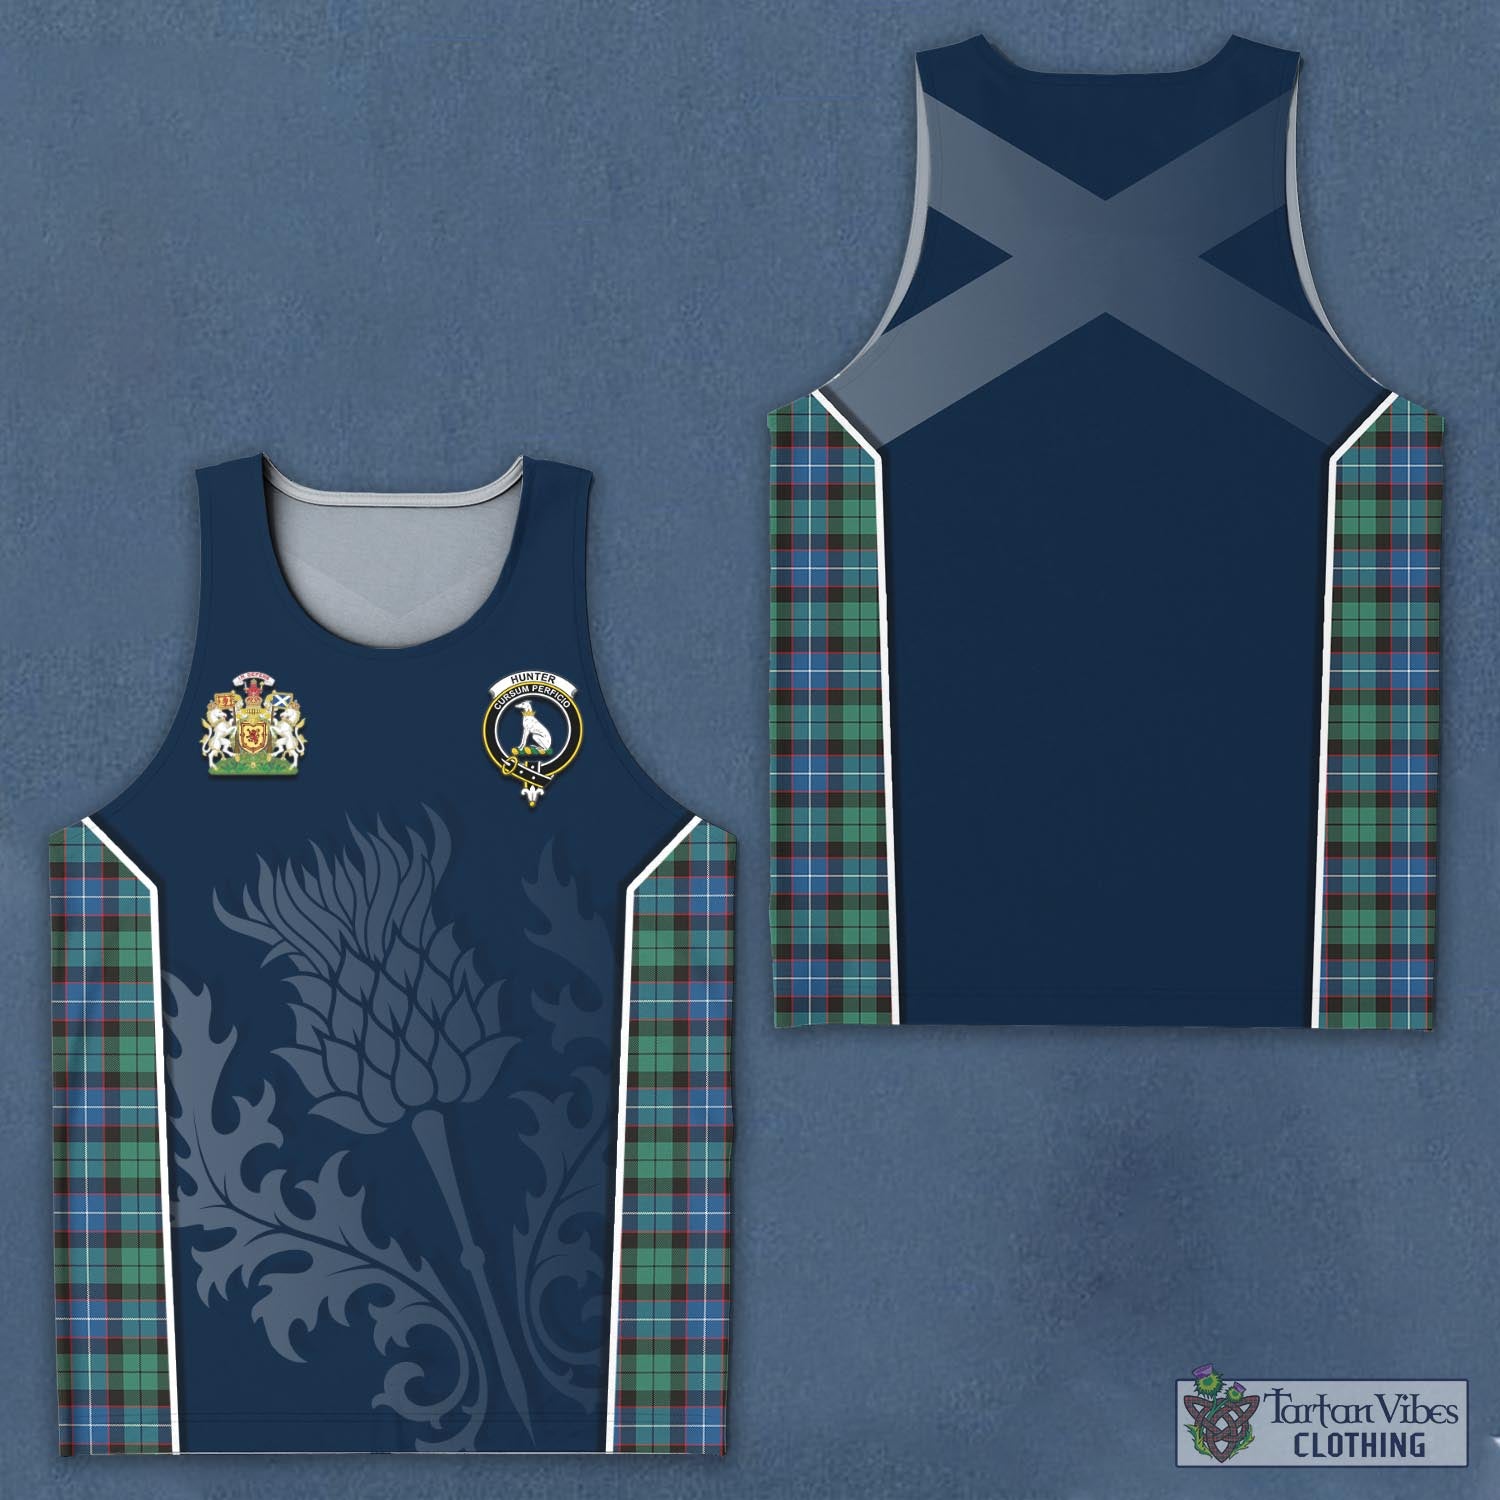 Tartan Vibes Clothing Hunter Ancient Tartan Men's Tanks Top with Family Crest and Scottish Thistle Vibes Sport Style